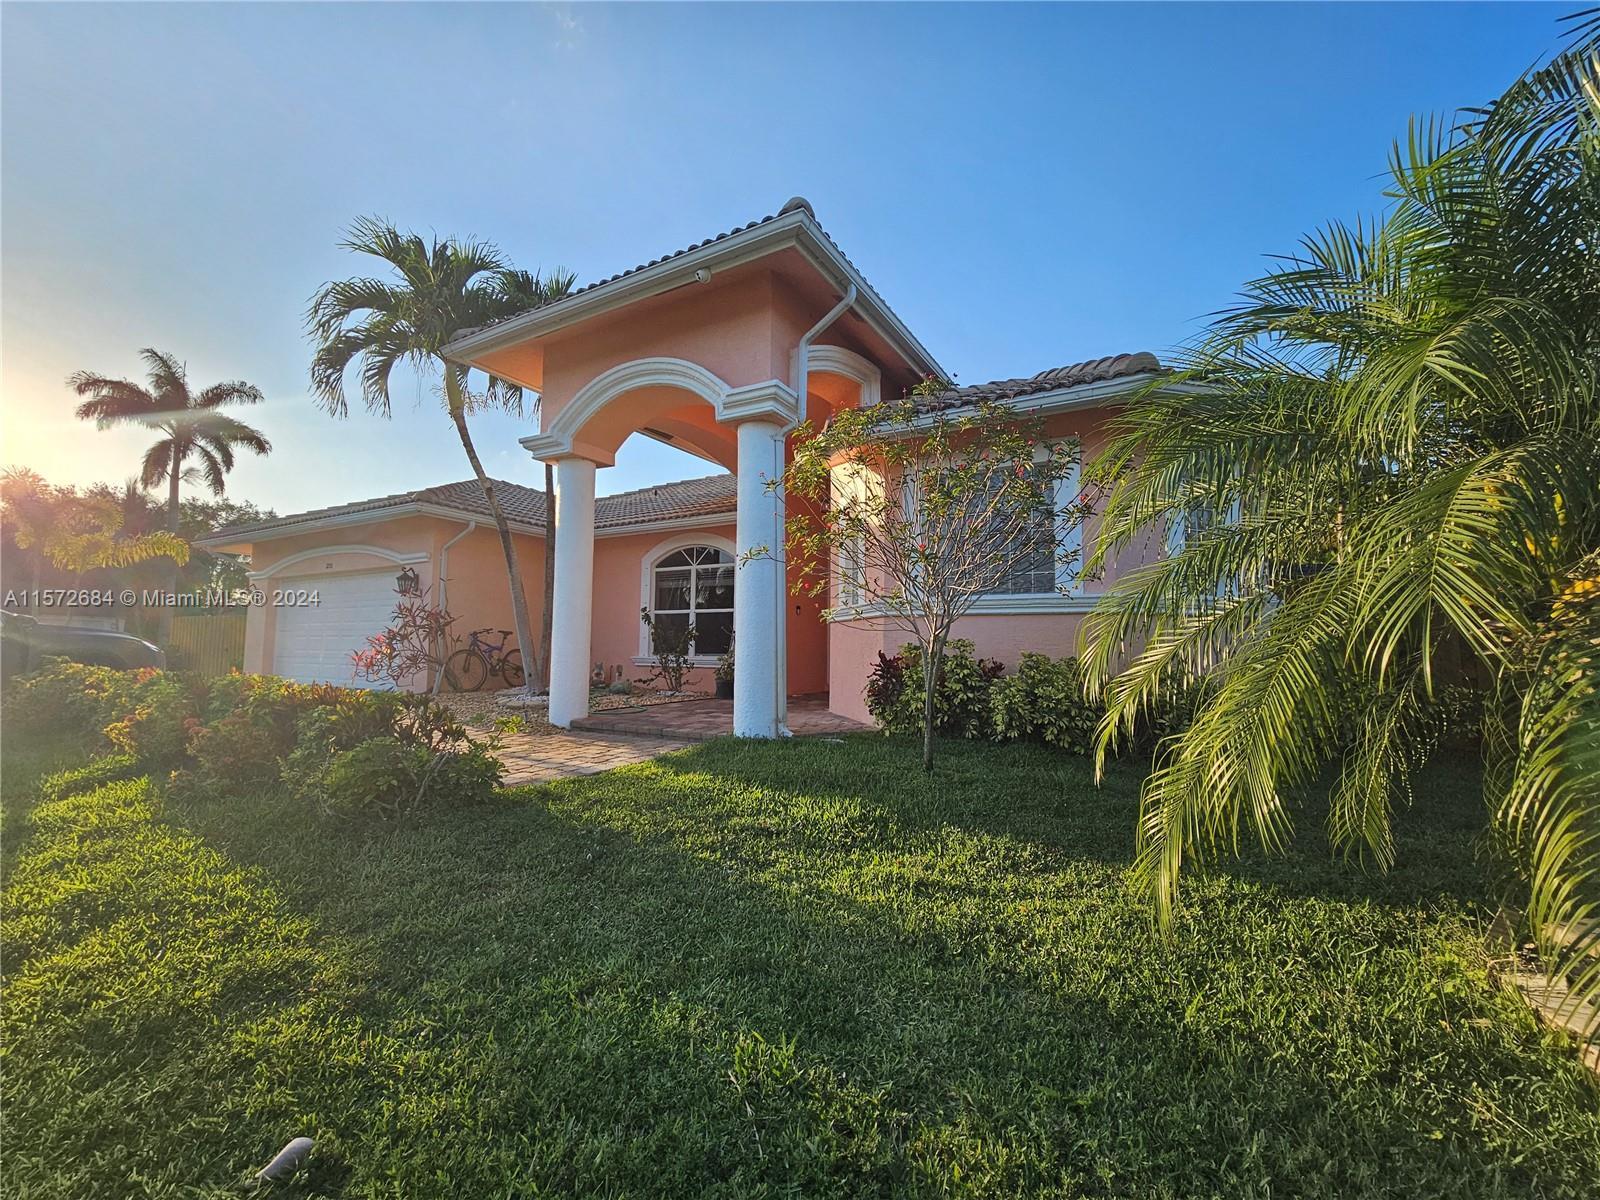 Photo of 2701 Yarmouth Dr in Wellington, FL